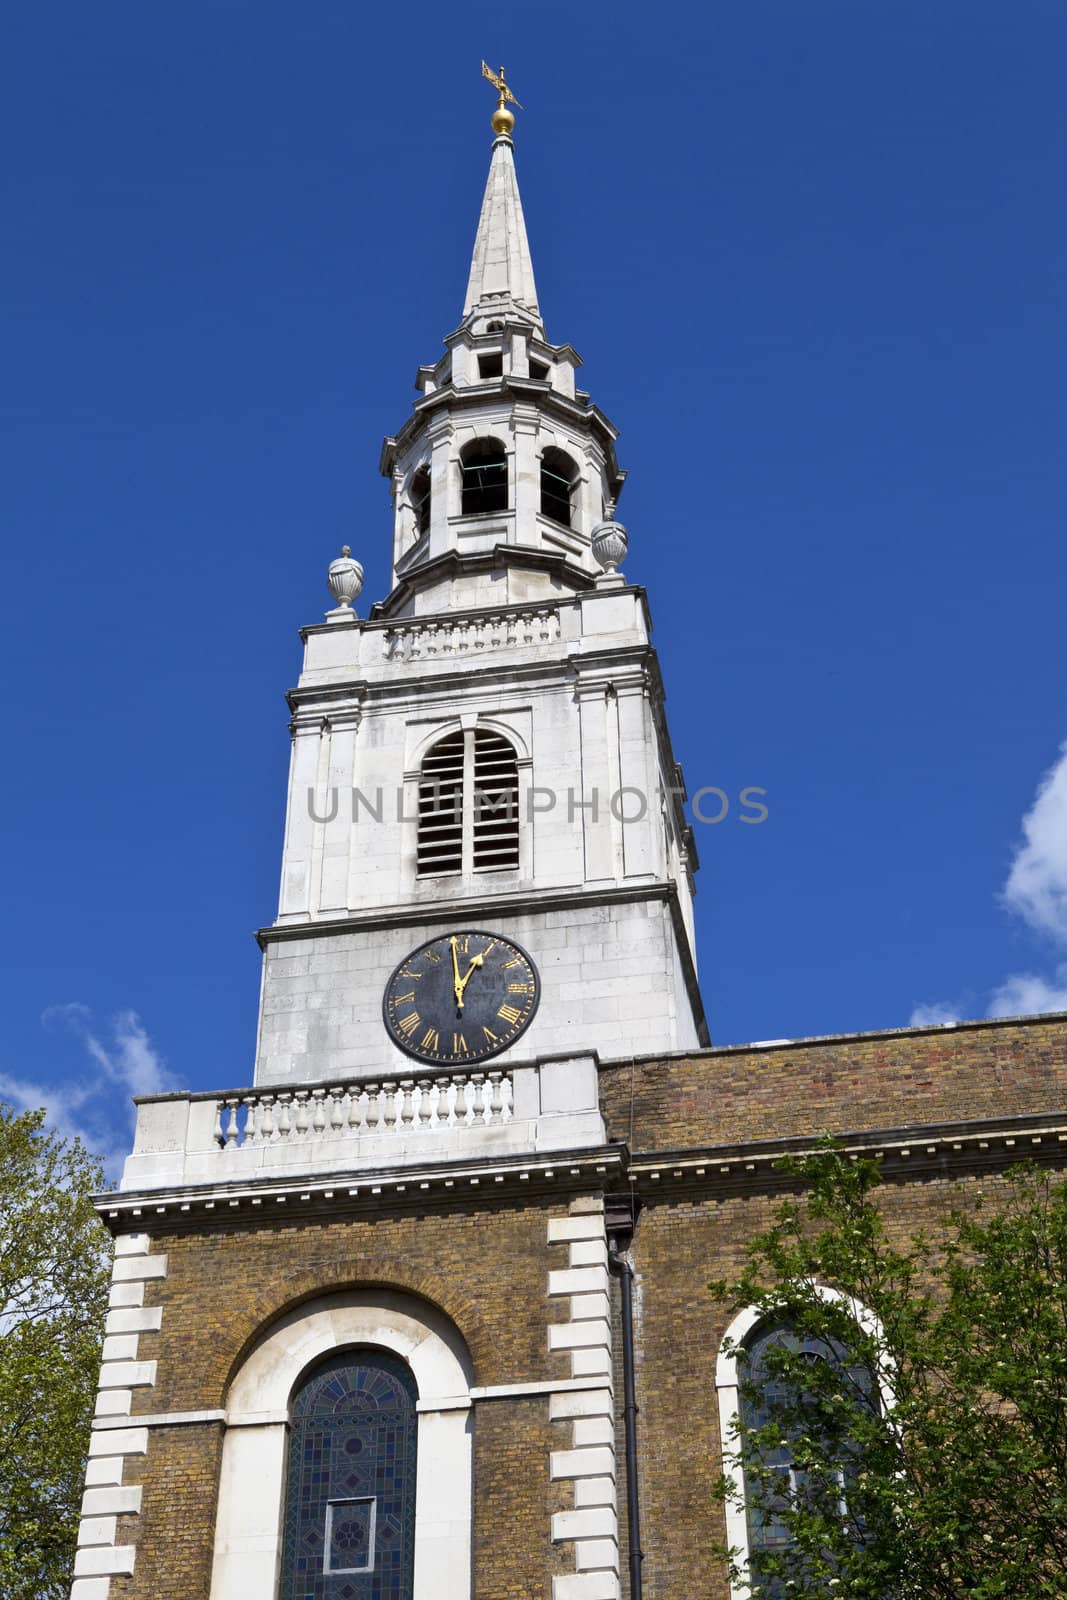 The historic St. James's Church in Clerkenwell, London.